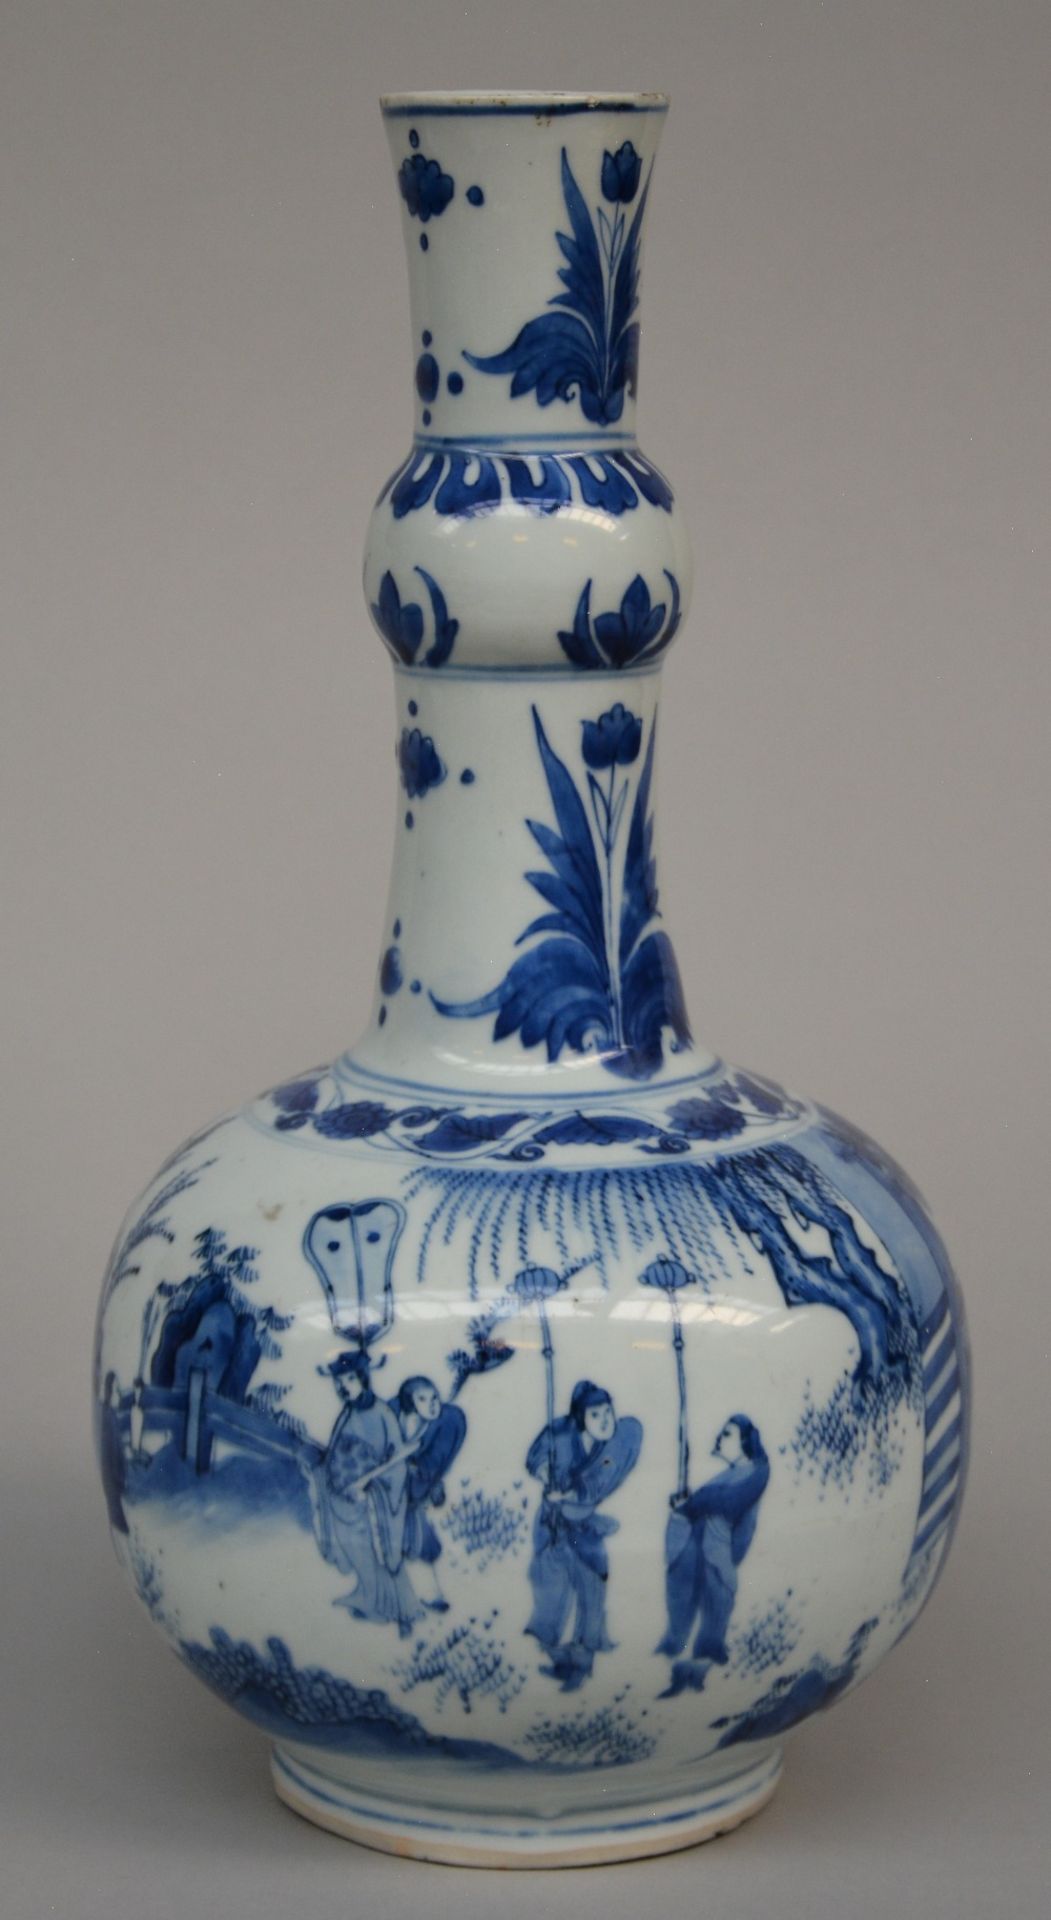 A Chinese blue and white bottle-shaped vase decorated with a genre scene in a garden, Transitional